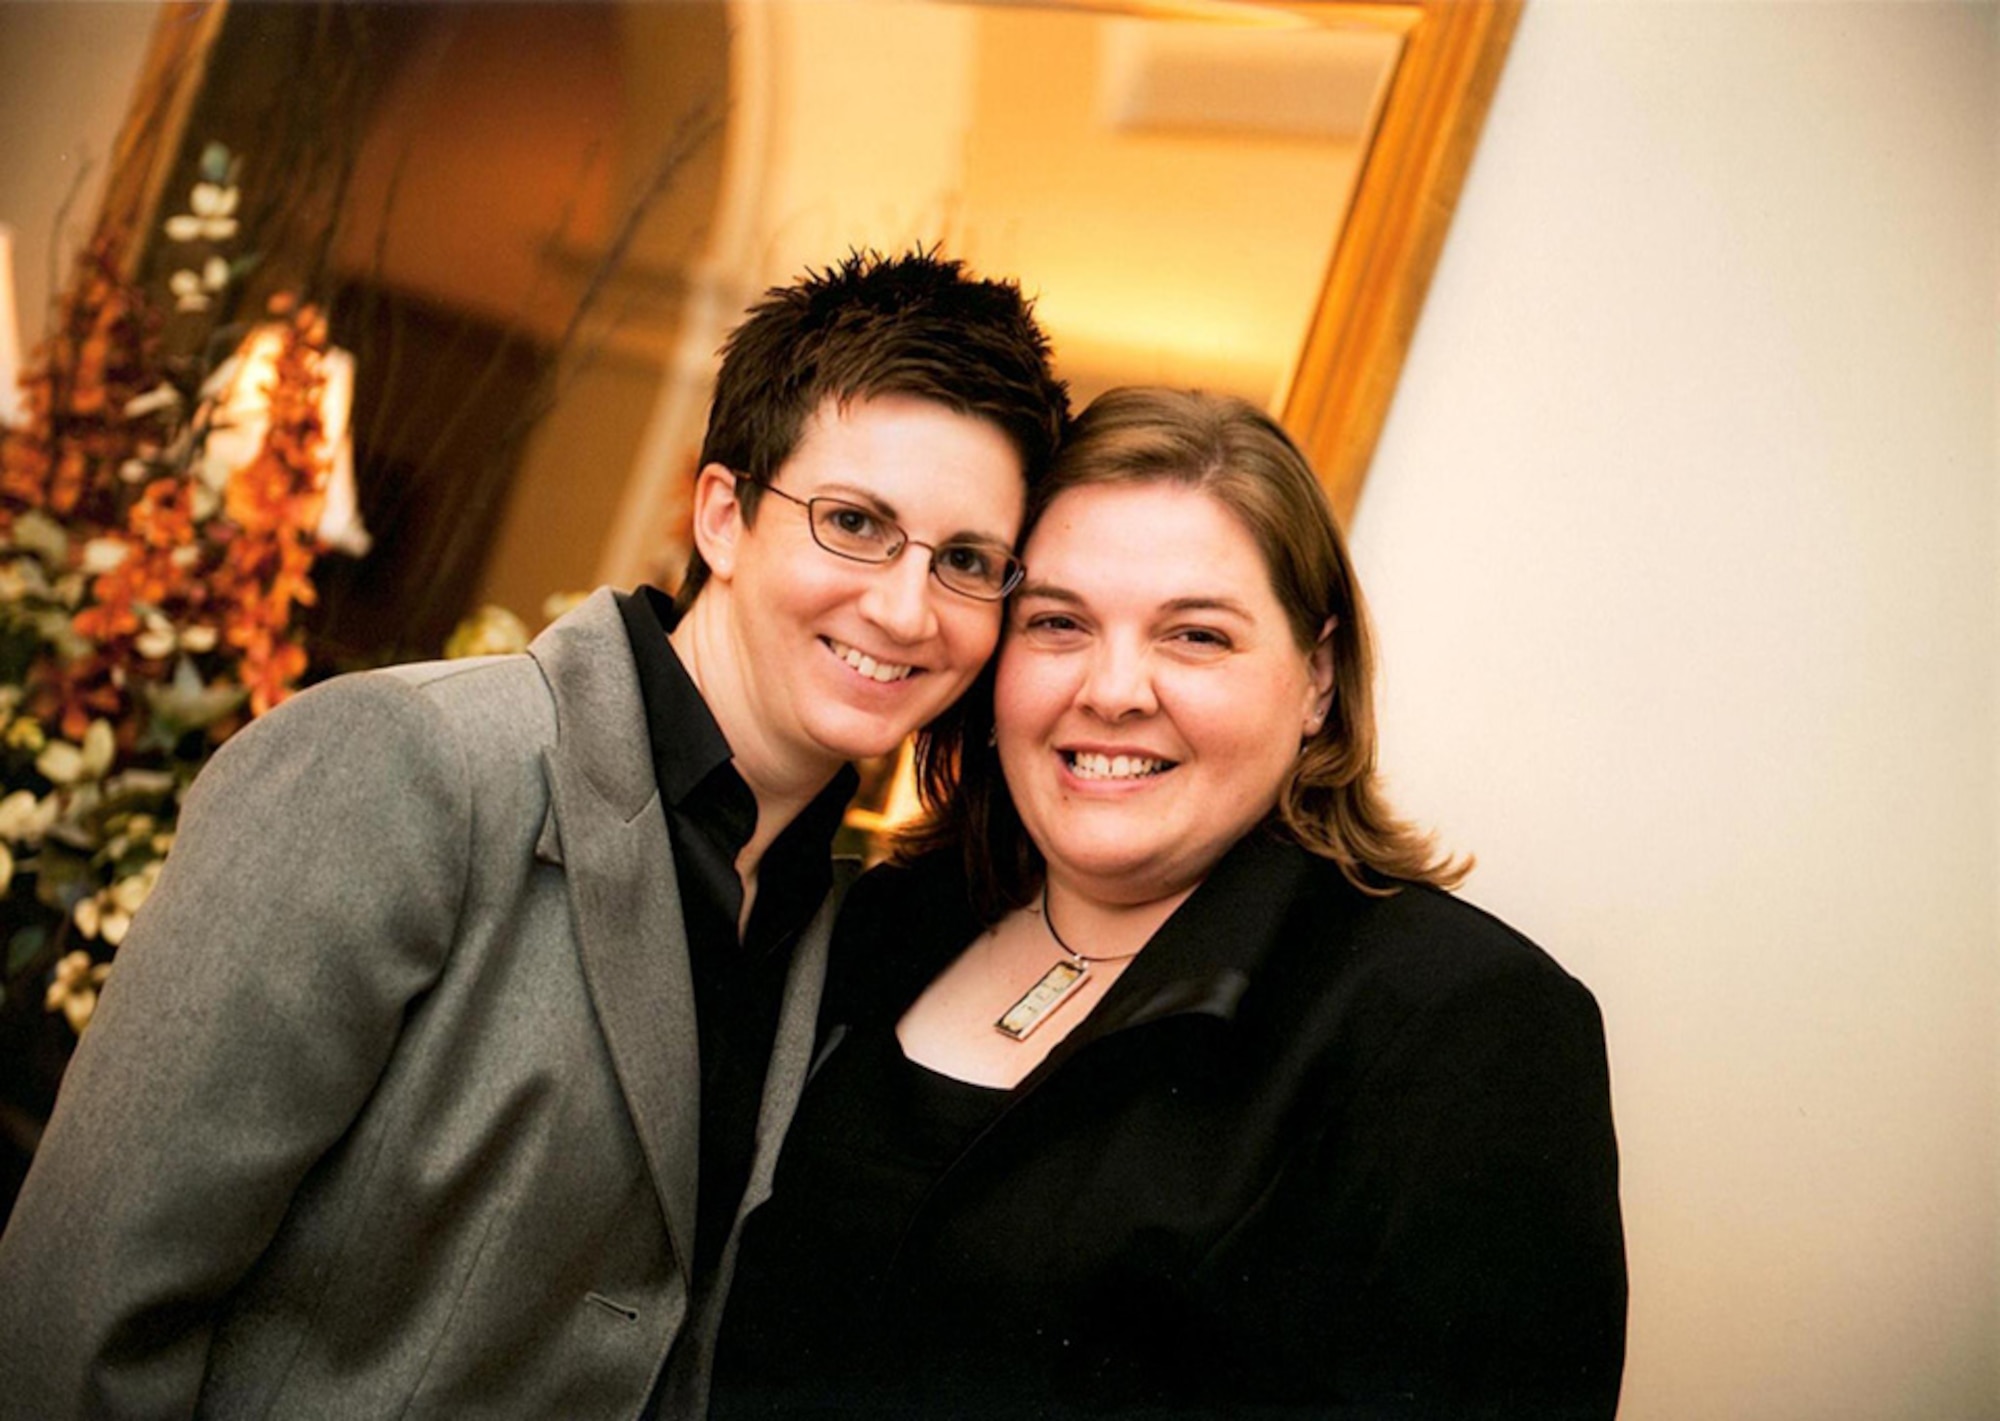 Master Sgt. Angela Caruso-Yahne, 34th Aeromedical Evacuation Squadron, Peterson Air Force Base, Colorado, (left) and her spouse, Mandy, pose for a photo at a friend's wedding. The two legally married July 2013, one month after the repeal of the Defense of Marriage Act and 14 years after their unofficial wedding. Approaching their sixth deployment together, the couple attended their first Yellow Ribbon event this year. (Courtesy photo)
